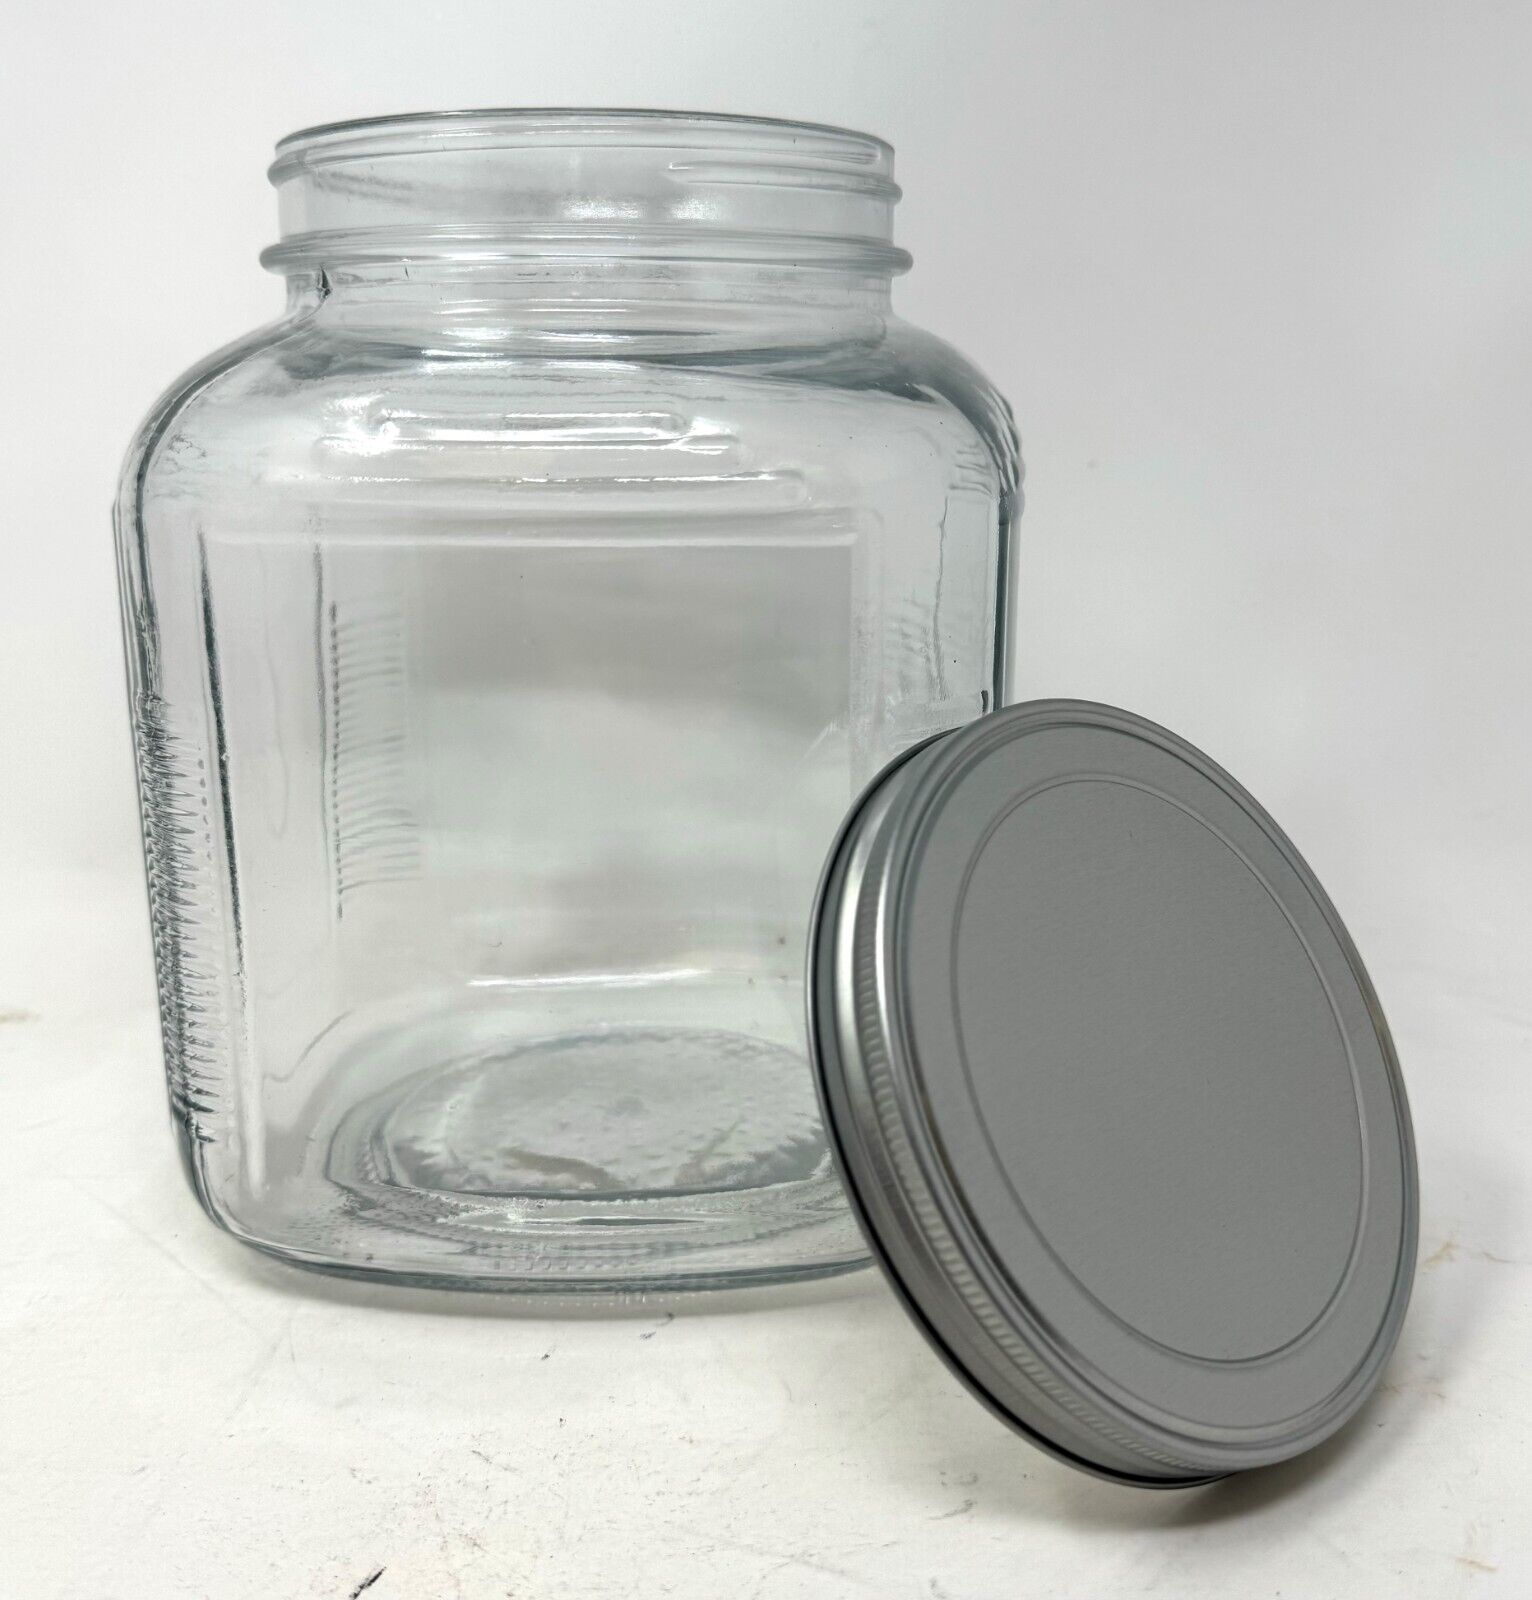 64 oz Canister Jar Square with Wide Mouth and Metal Lid - BRAND NEW - 4 PACK